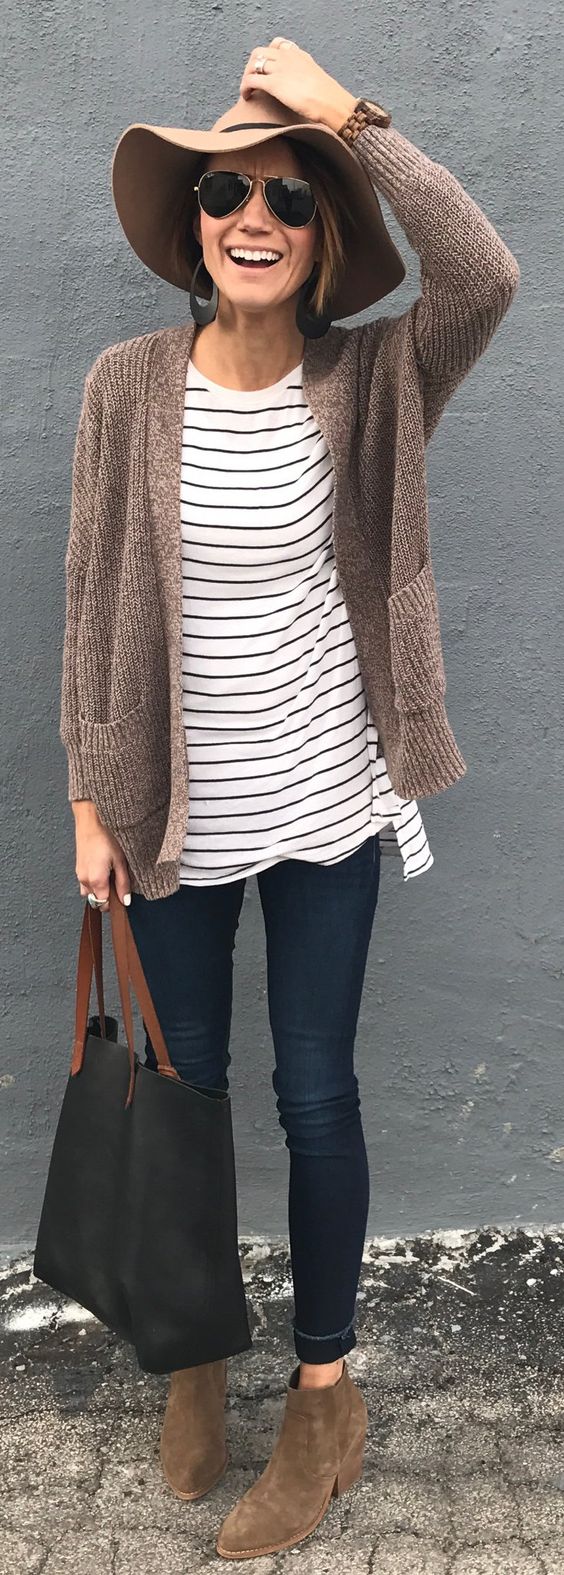 stripped top + knit cardi + bag + jeans + boots